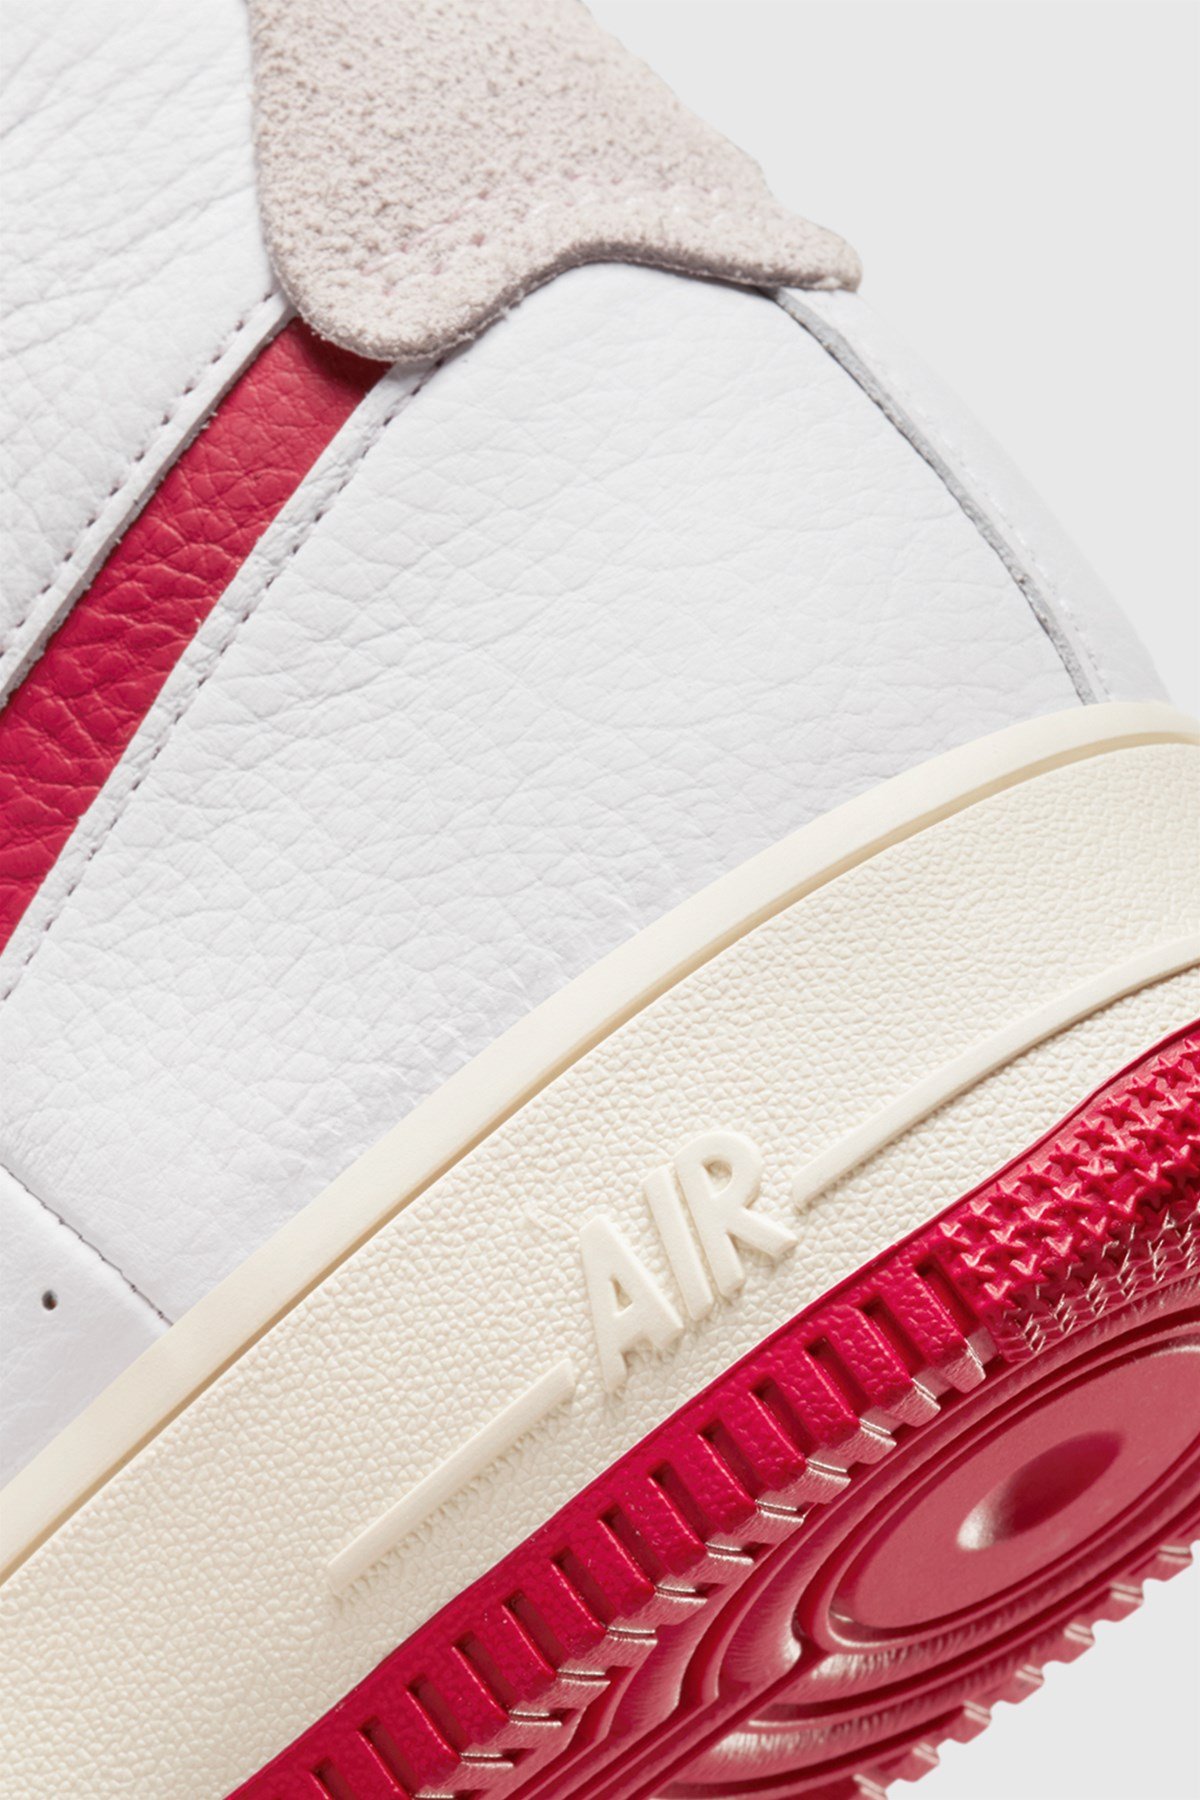 Nike Air Force 1 Sculpt Summit White/Gym Red